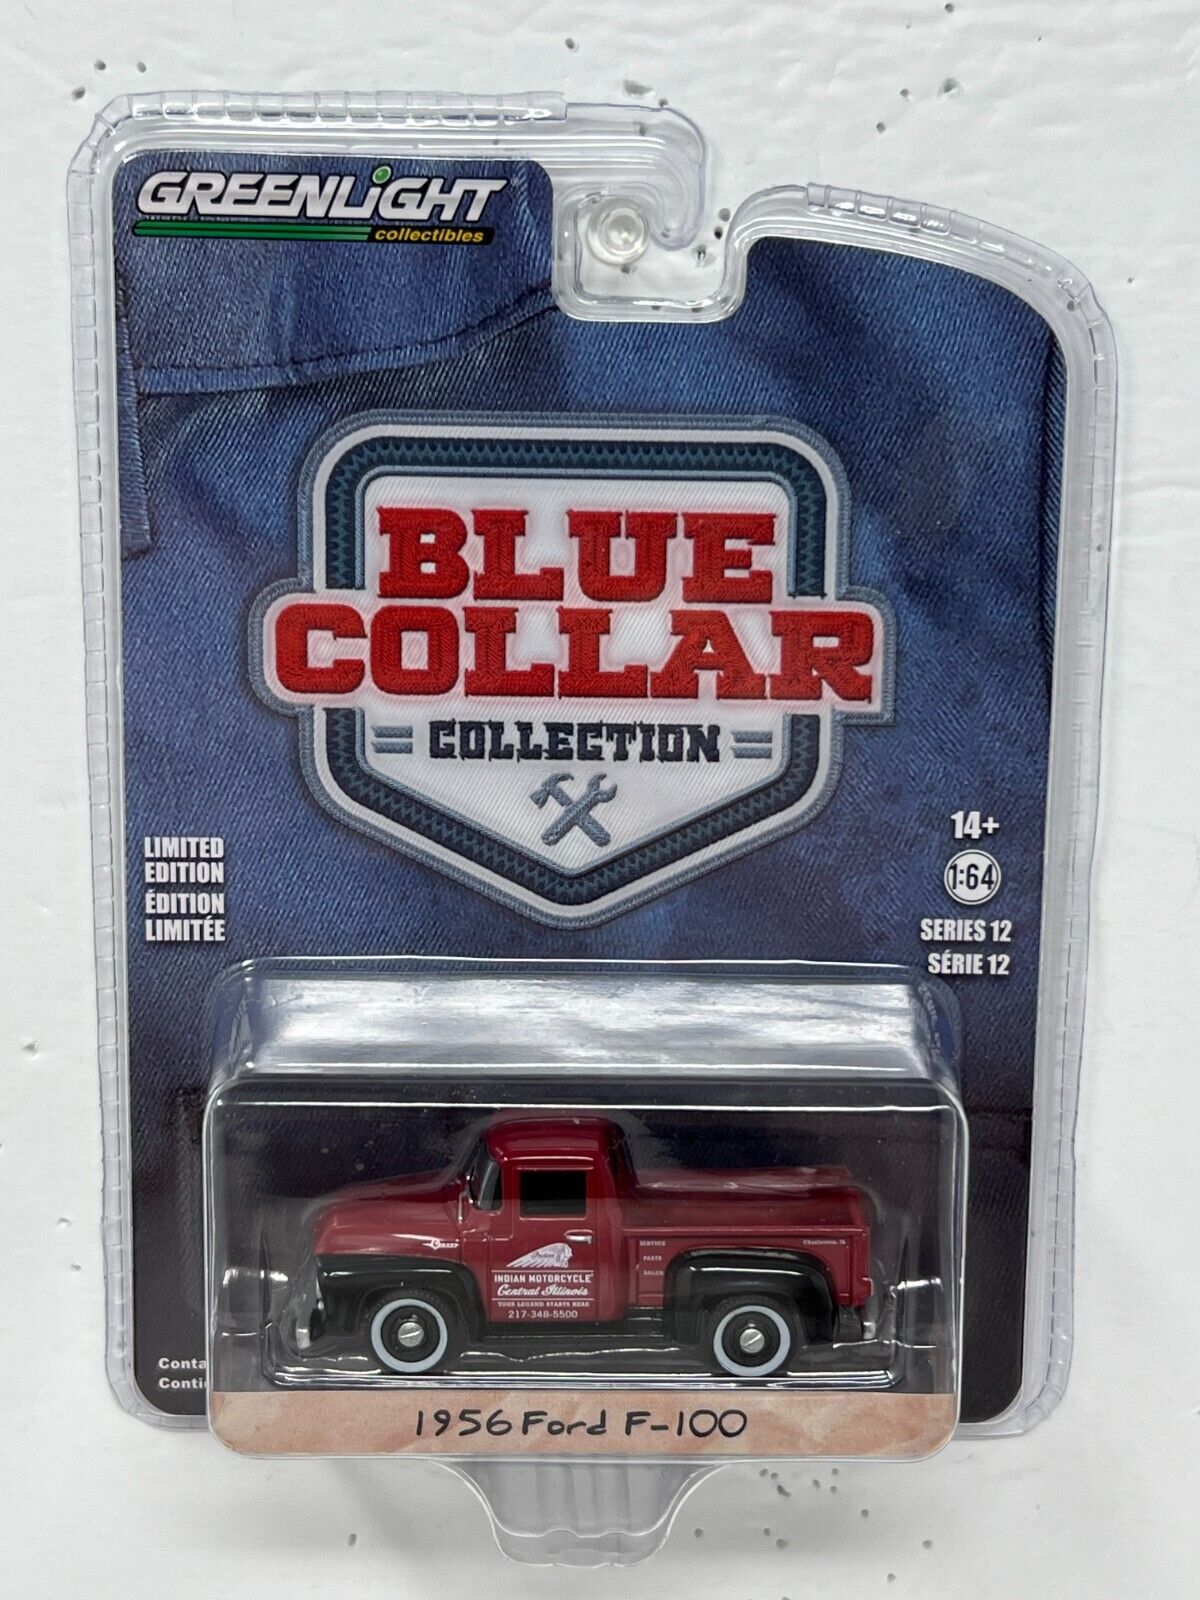 Greenlight Blue Collar Collection 1956 Ford F-100 1:64 Diecast